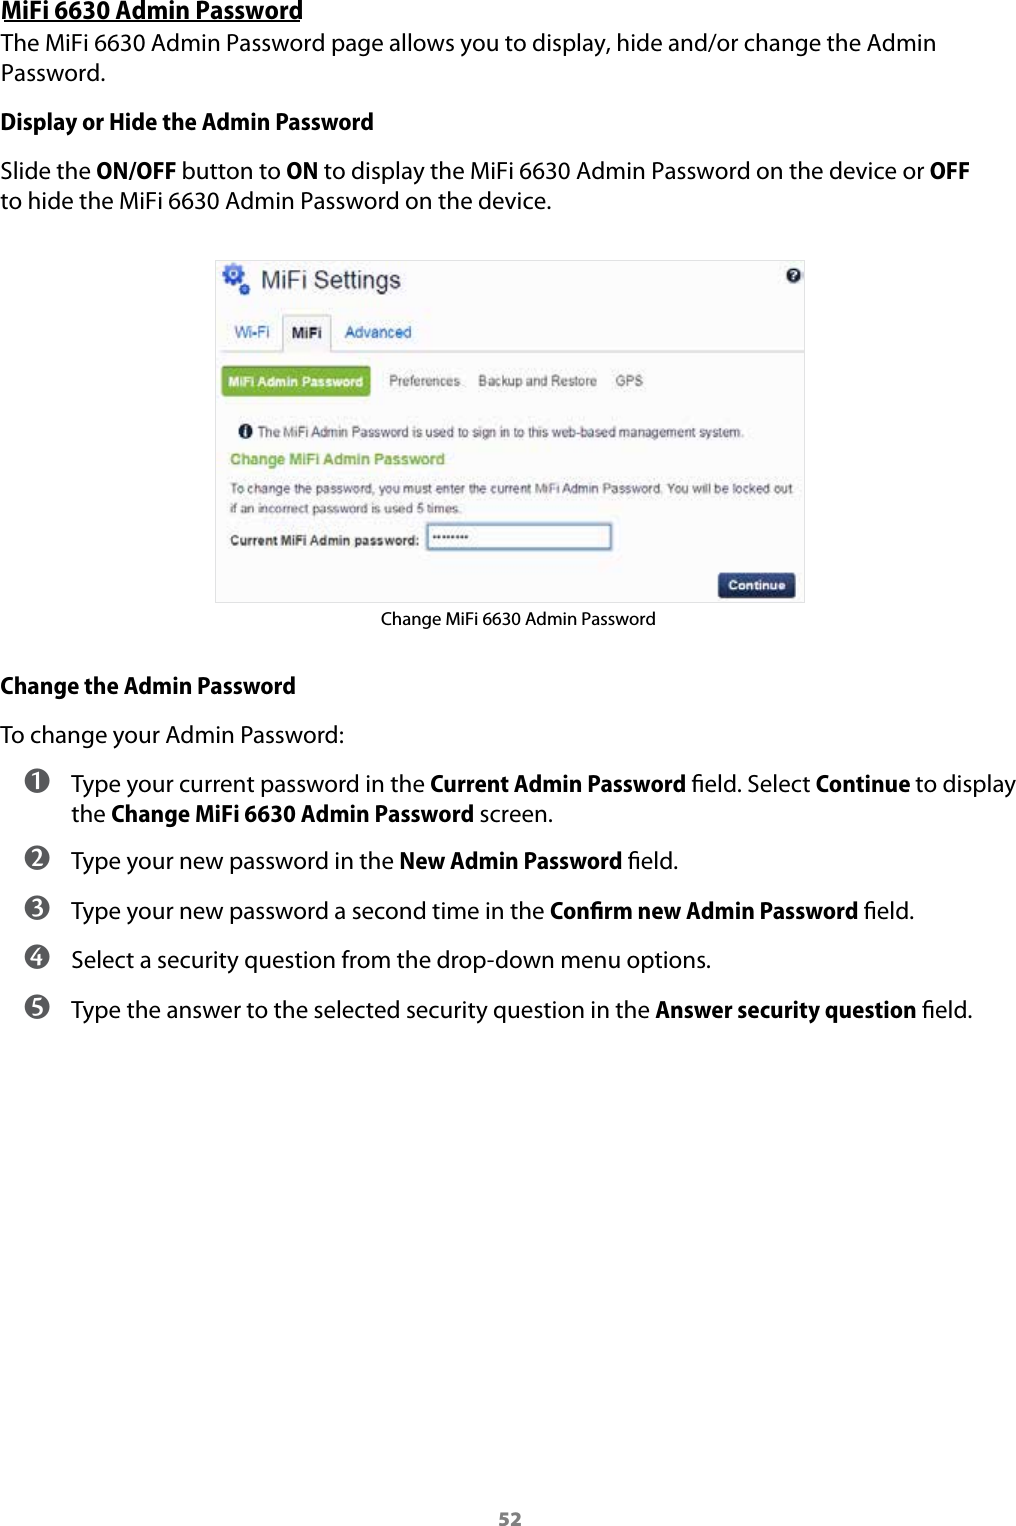 52MiFi 6630 Admin PasswordThe MiFi 6630 Admin Password page allows you to display, hide and/or change the Admin Password.Display or Hide the Admin PasswordSlide the ON/OFF button to ON to display the MiFi 6630 Admin Password on the device or OFF to hide the MiFi 6630 Admin Password on the device.Change MiFi 6630 Admin PasswordChange the Admin PasswordTo change your Admin Password: ➊ Type your current password in the Current Admin Password eld. Select Continue to display the Change MiFi 6630 Admin Password screen.➋  Type your new password in the New Admin Password eld.➌  Type your new password a second time in the Conﬁrm new Admin Password eld.➍  Select a security question from the drop-down menu options.➎  Type the answer to the selected security question in the Answer security question eld.